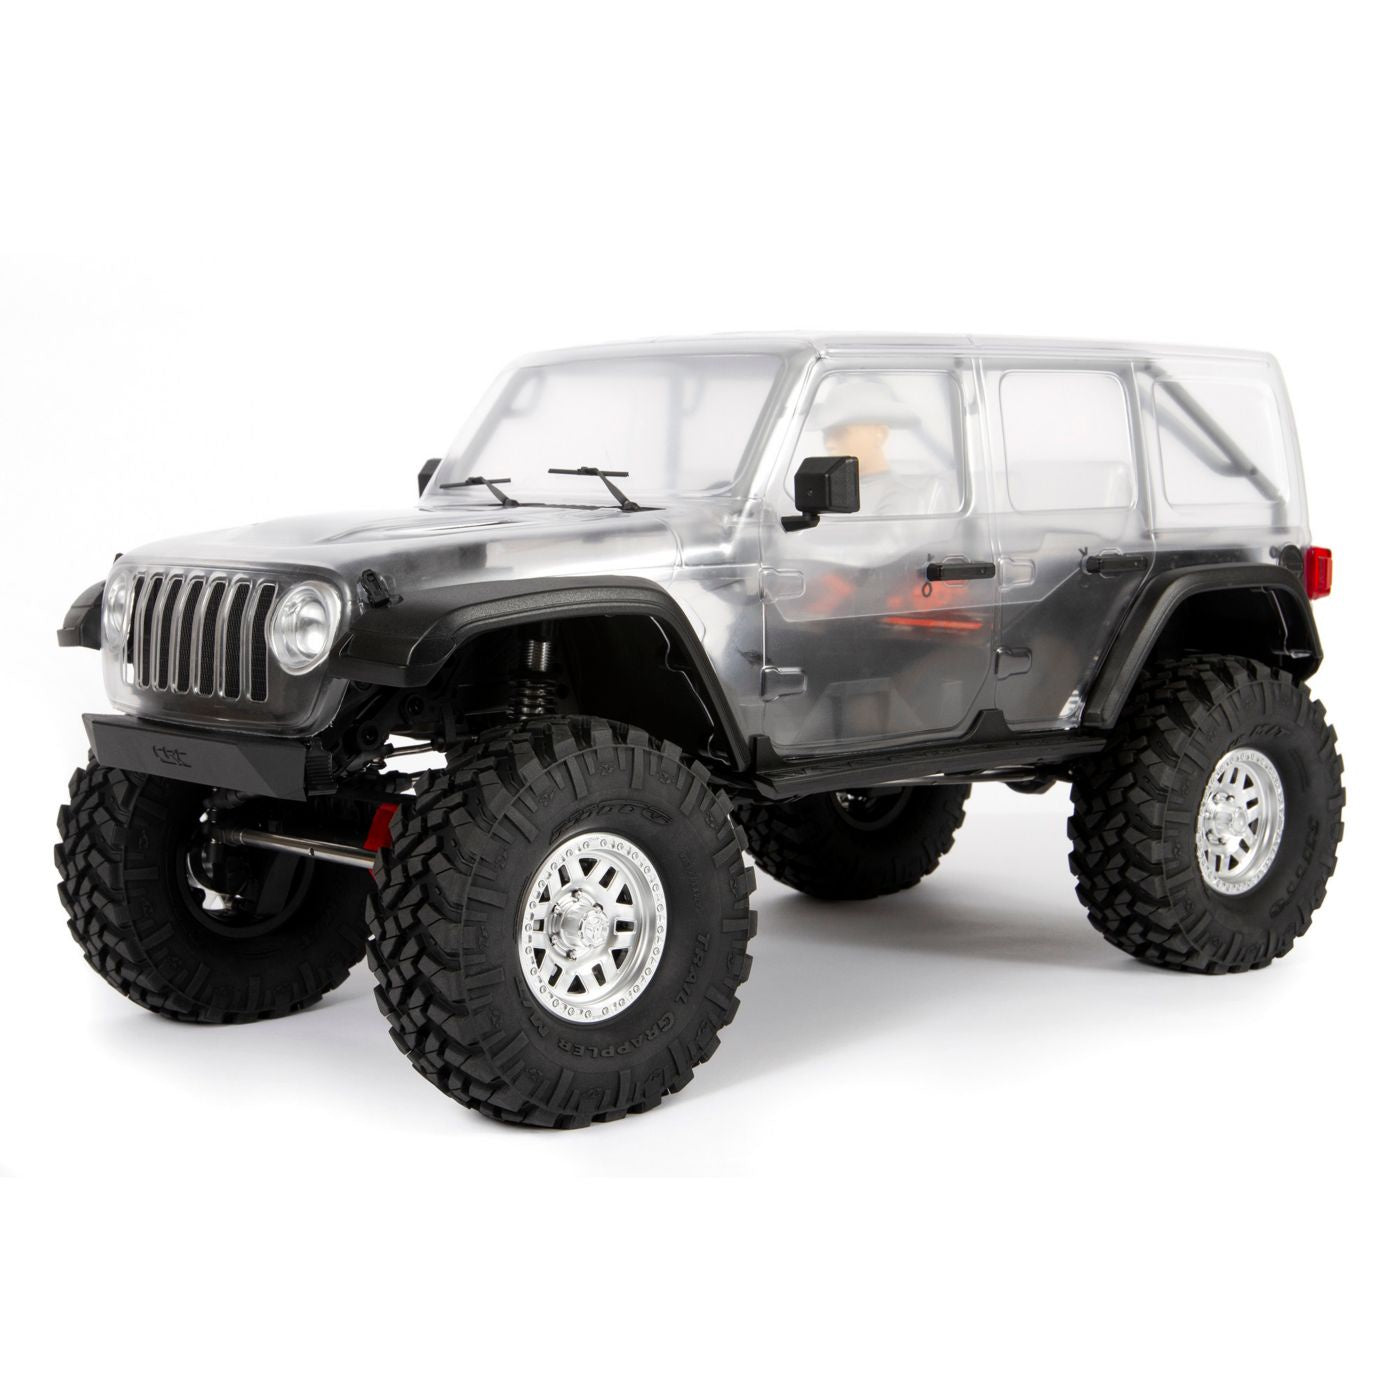 Axial 1/10 4WD Off-Road Kit Brushed SCX10 III Jeep JL Wrangler - AXI03007